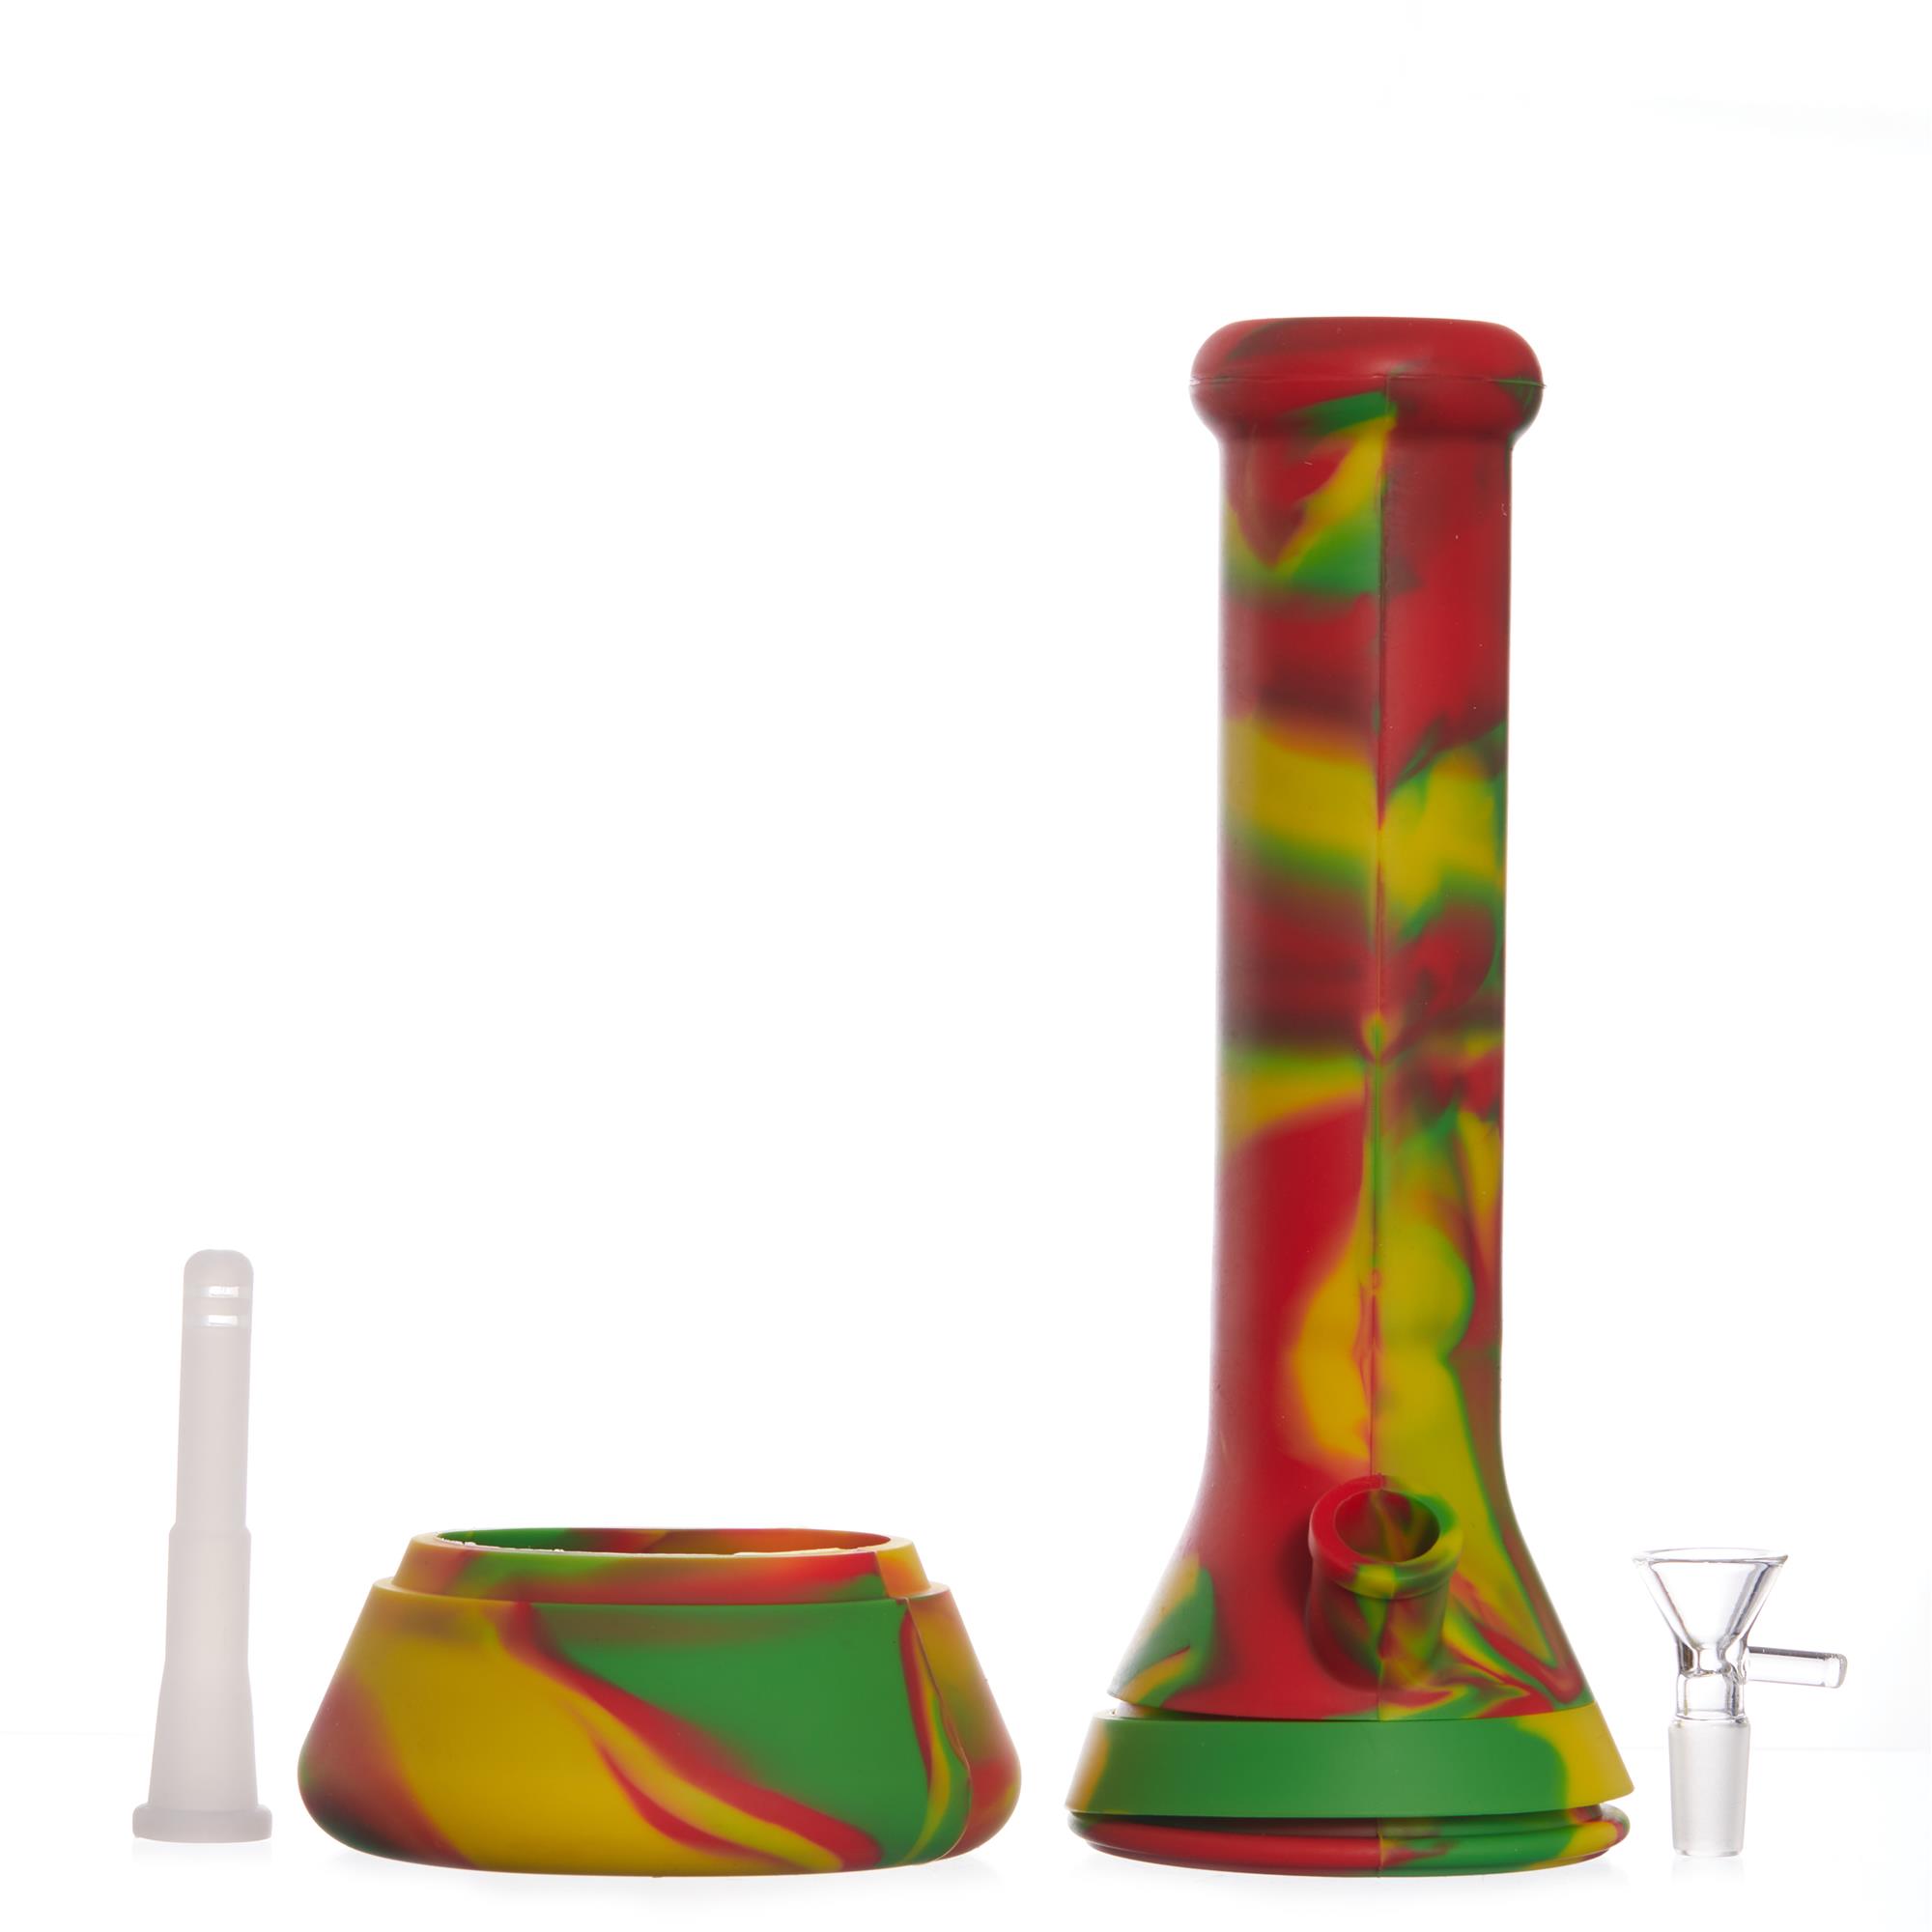 CLASSIC STYLE AND SHAPE SILICONE BONG